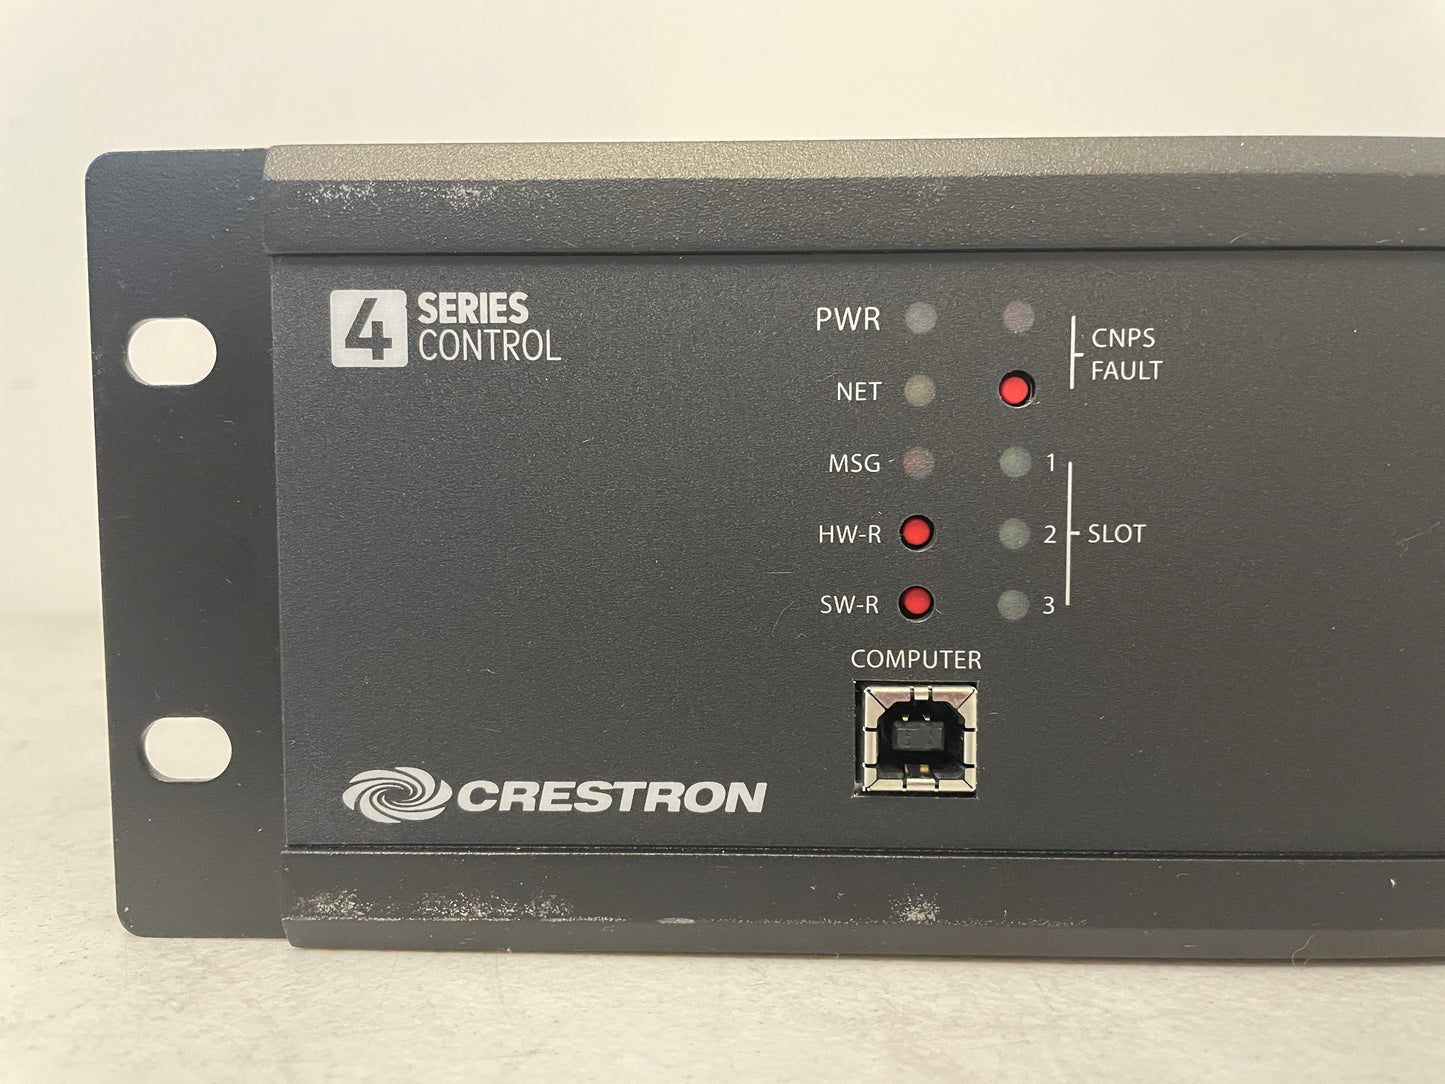 Used Crestron Pro4 Series Control Processor, Model M201921001 for Sale. We Sell Professional Audio Equipment. Audio Systems, Amplifiers, Consoles, Mixers, Electronics, Entertainment and Live Sound.